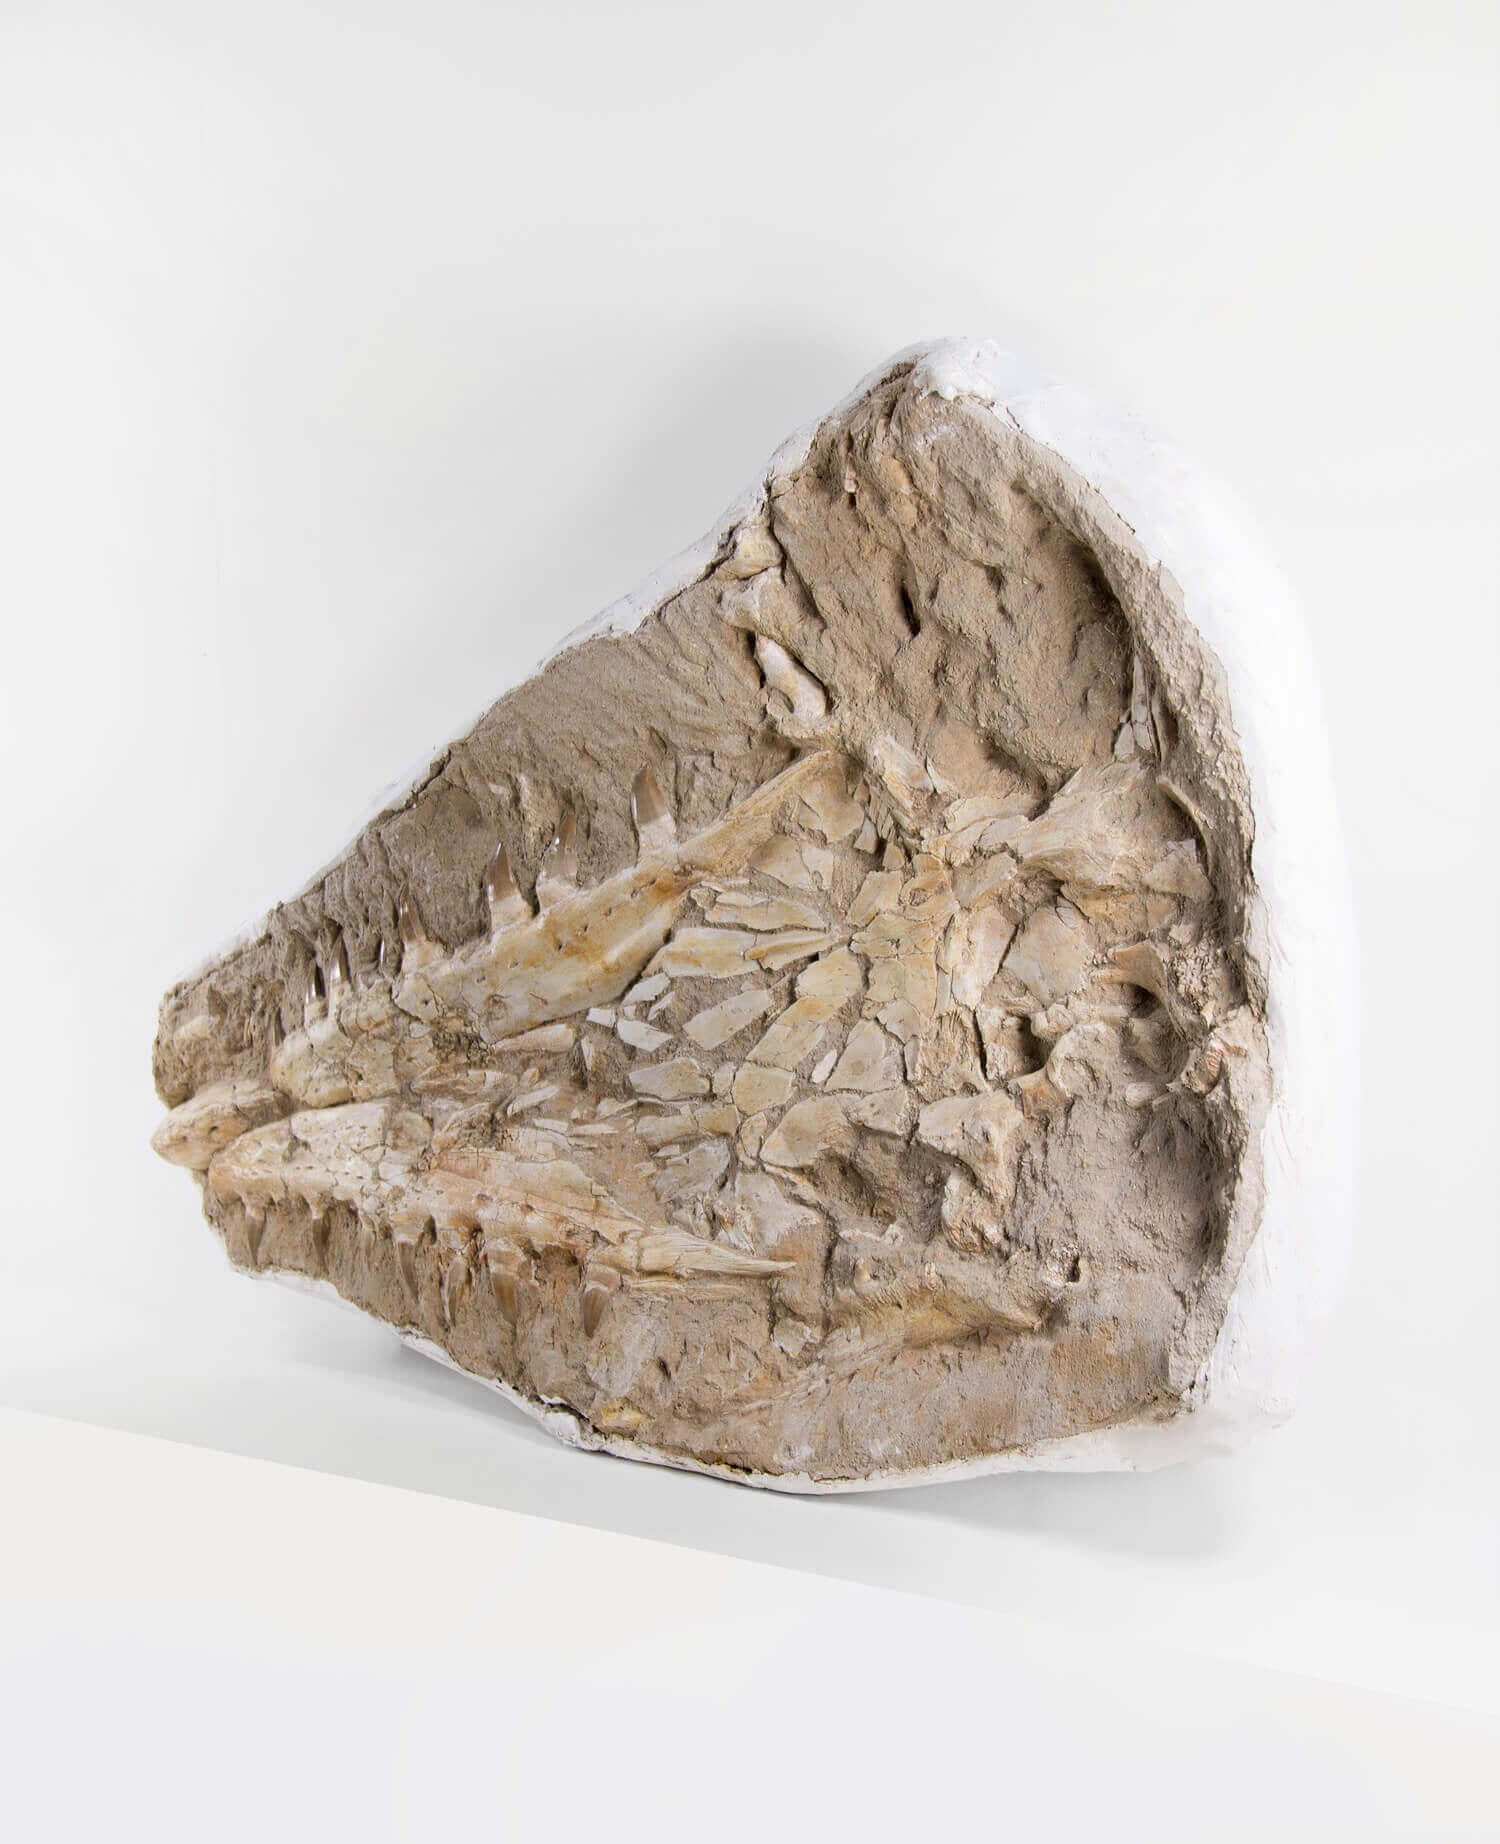 A stunning museum-standard rare fossil Beaugei arambourg mosasaurus jaw for sale measuring 3.9 feet at THE FOSSIL STORE